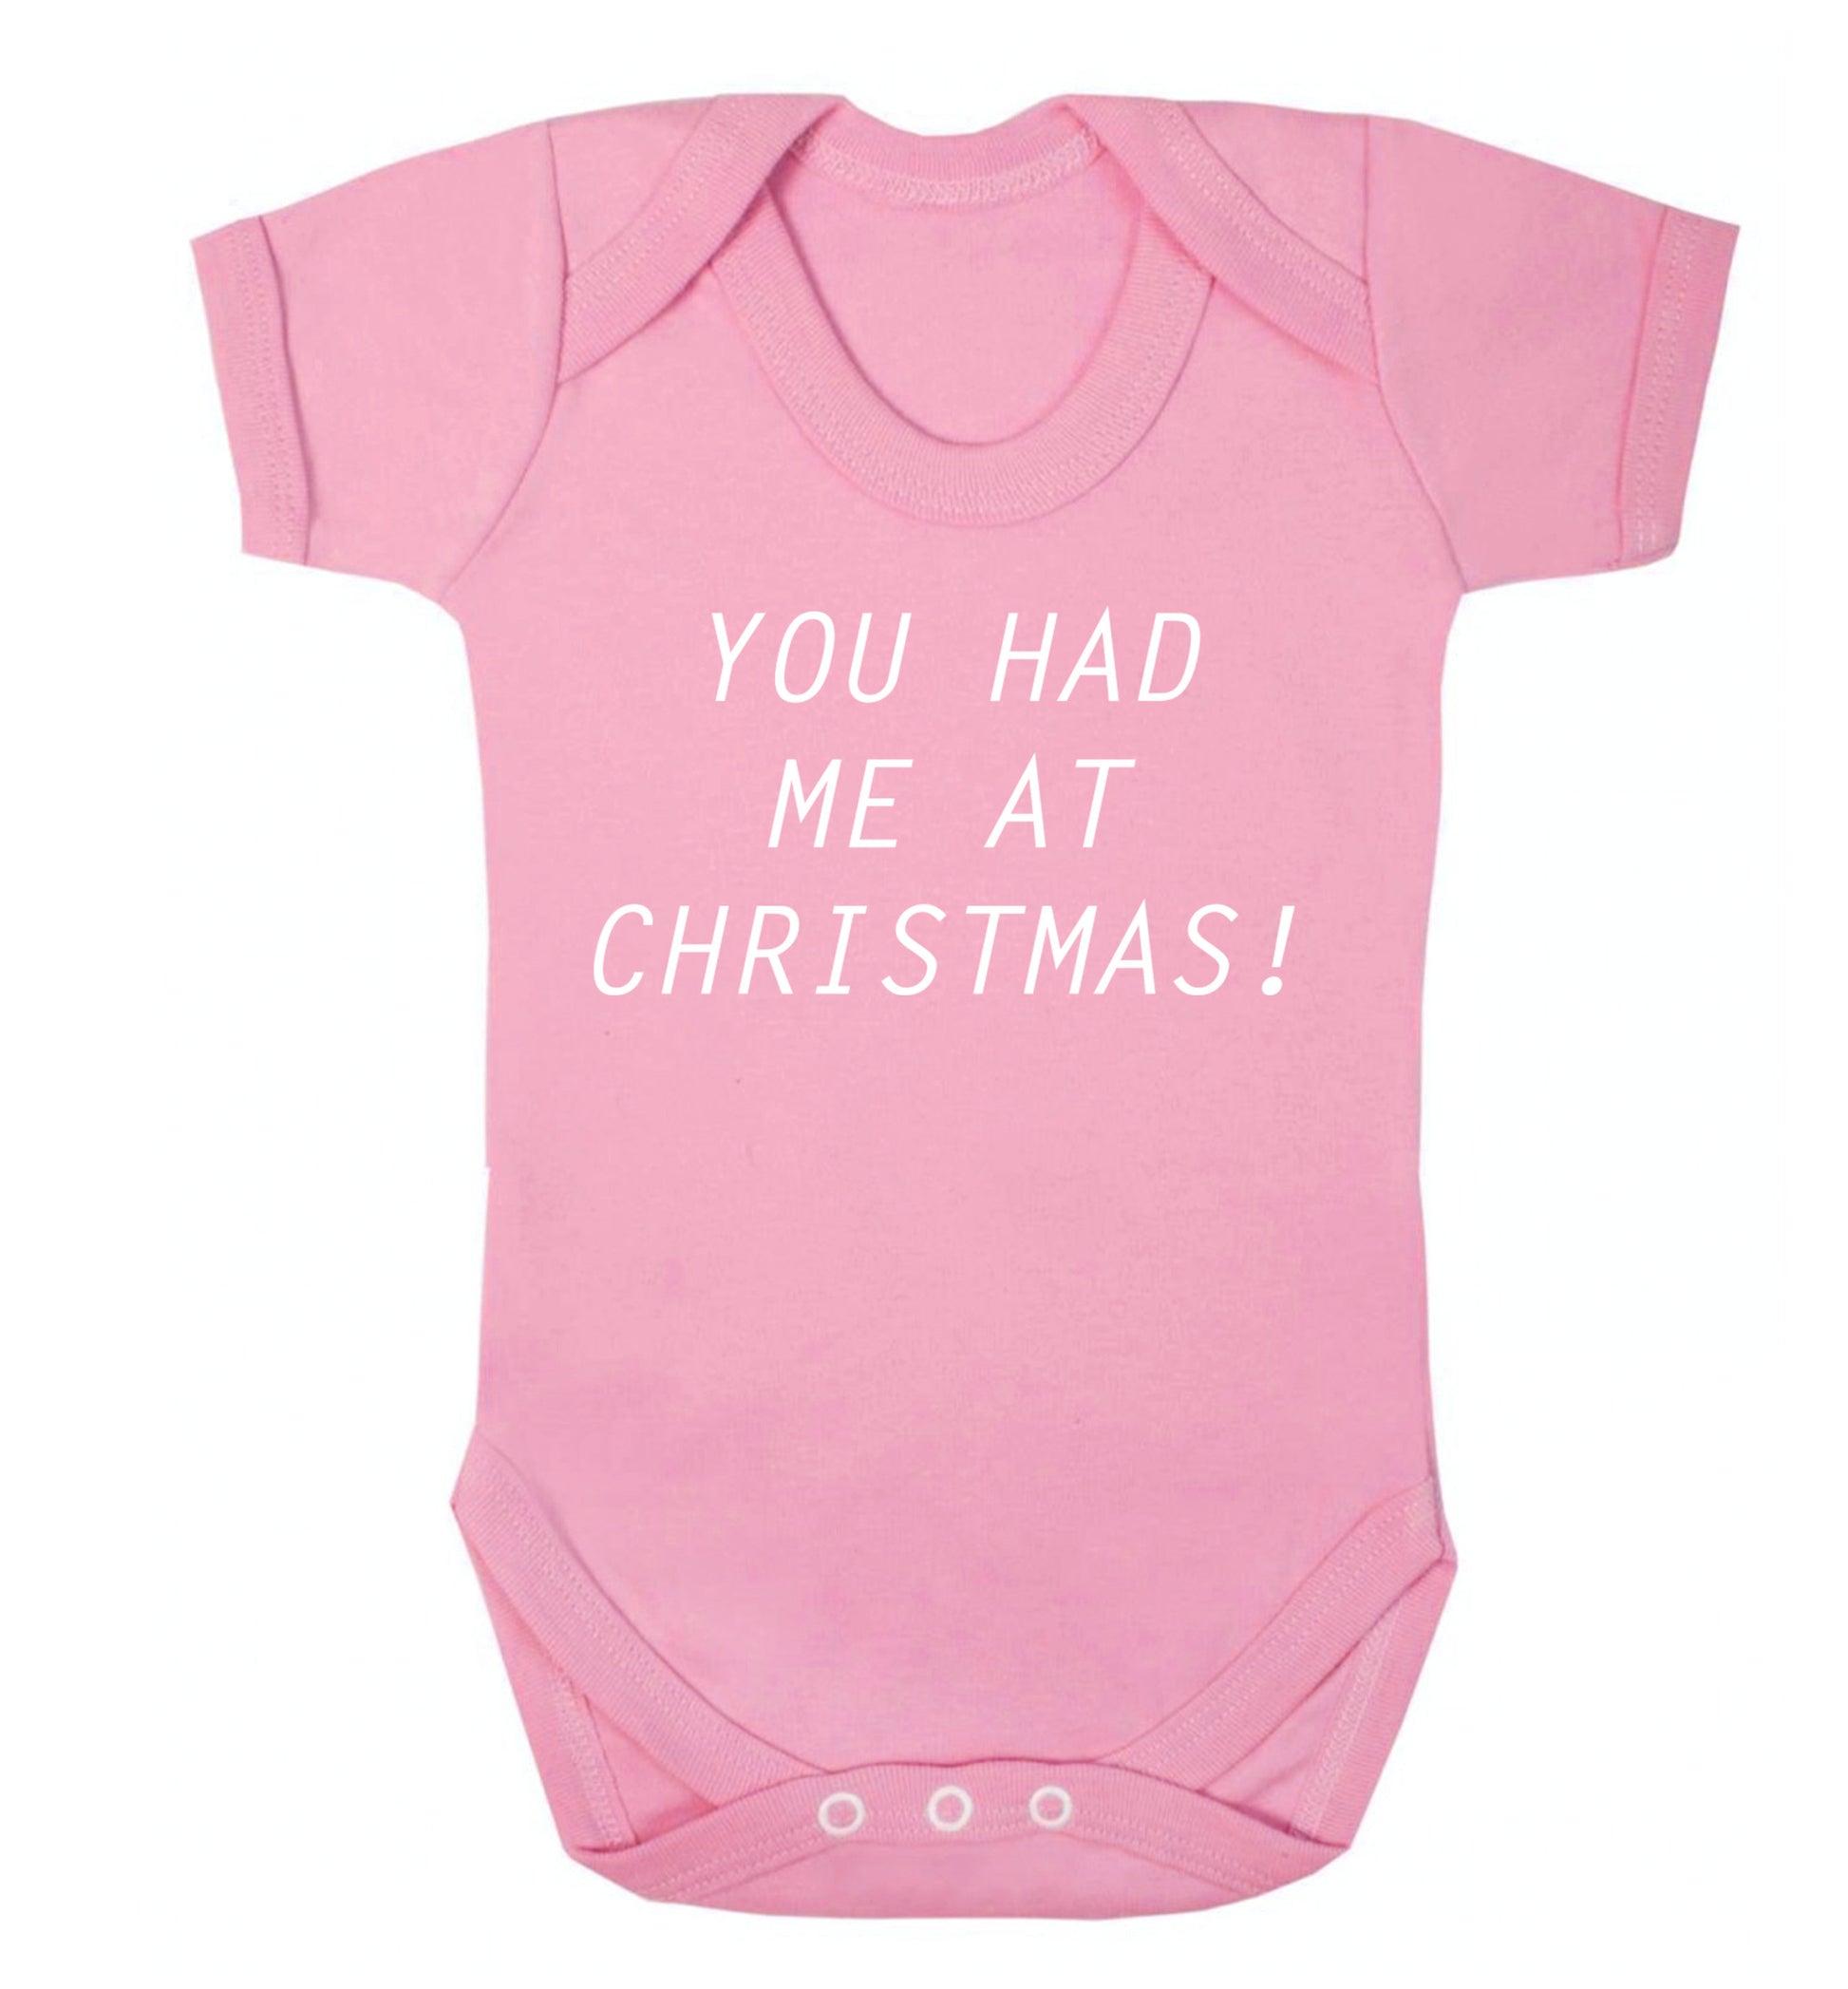 You had me at Christmas Baby Vest pale pink 18-24 months